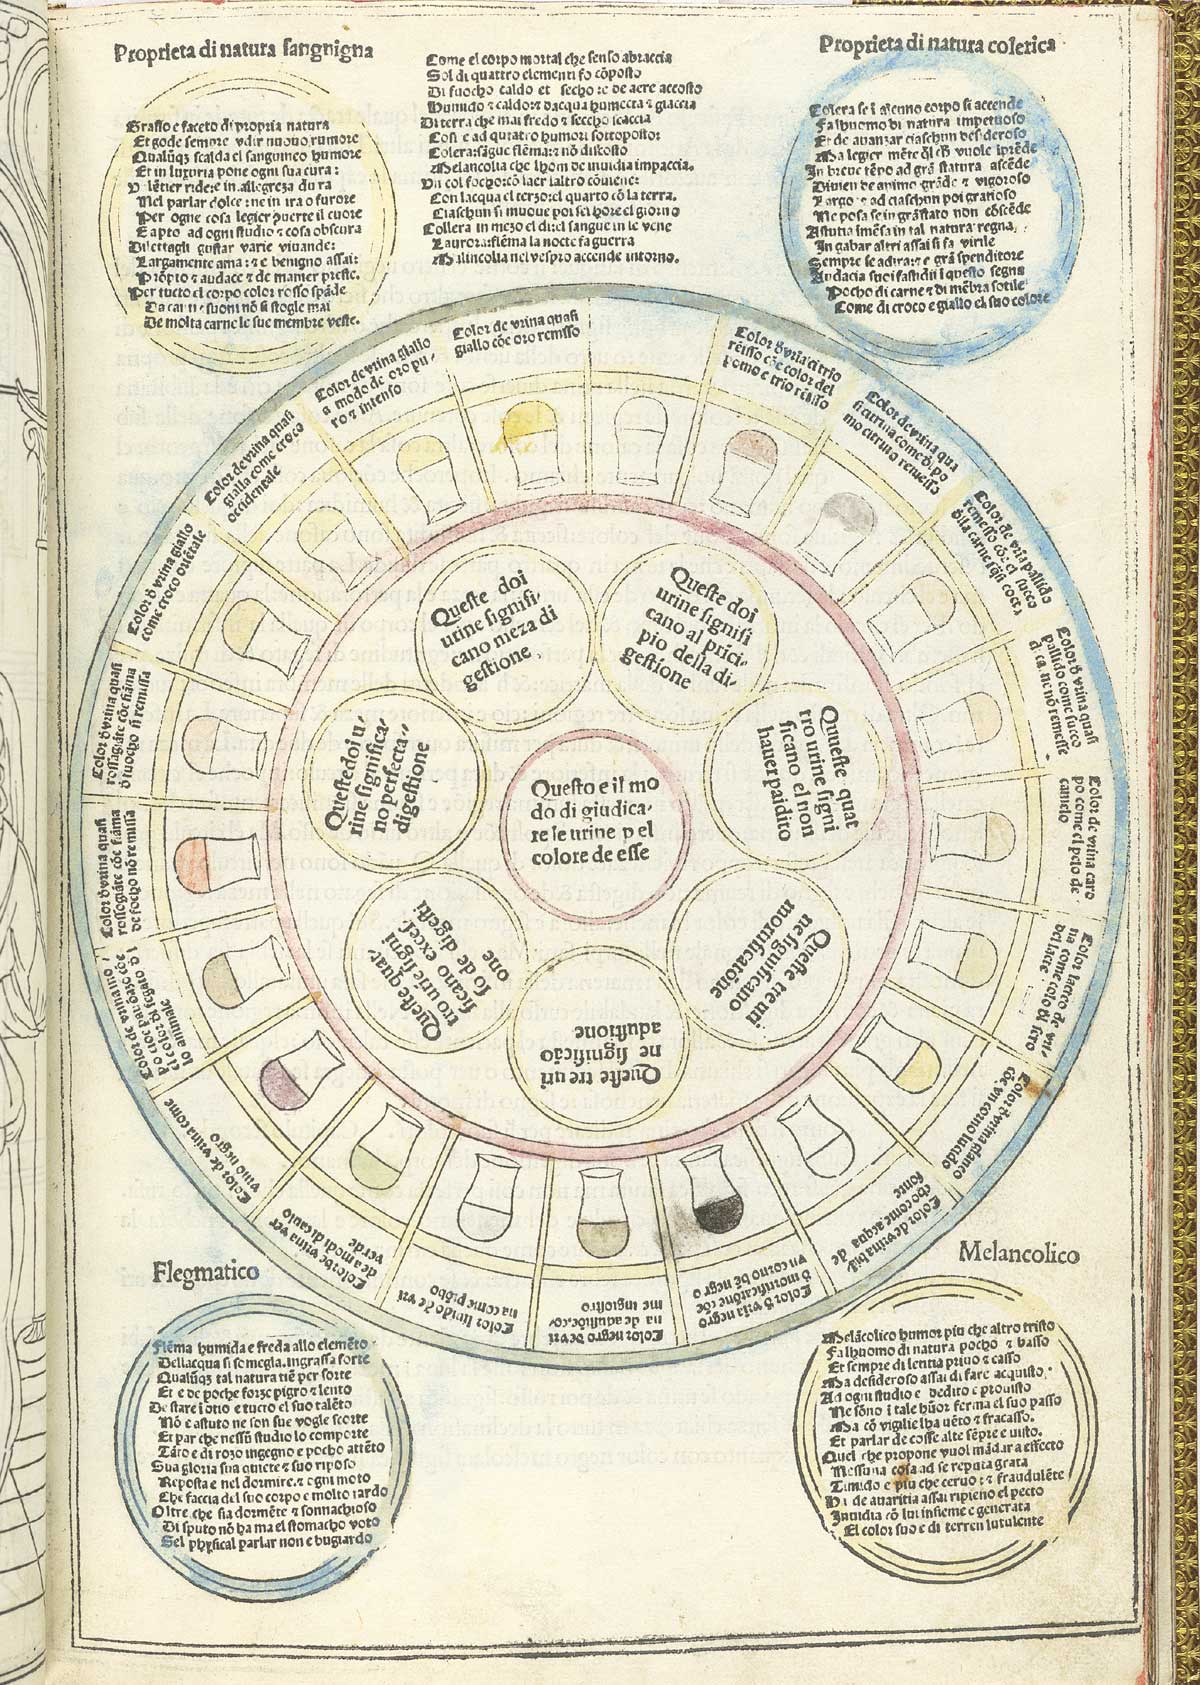 Page 3 of Johannes de Ketham's Fasiculo de medicina features a diagnostic uroscopy chart. The chart identifies the differences in urine by color, contents, and consistency. The focus is on colors, each of which is represented by a matula or flask.  The color of urine also reflected the predominance of one of the four humors in the examined person; this predominance determined one’s 'temperament' as (clockwise, from top left) sanguine, choleric, melancholic, or phlegmatic.